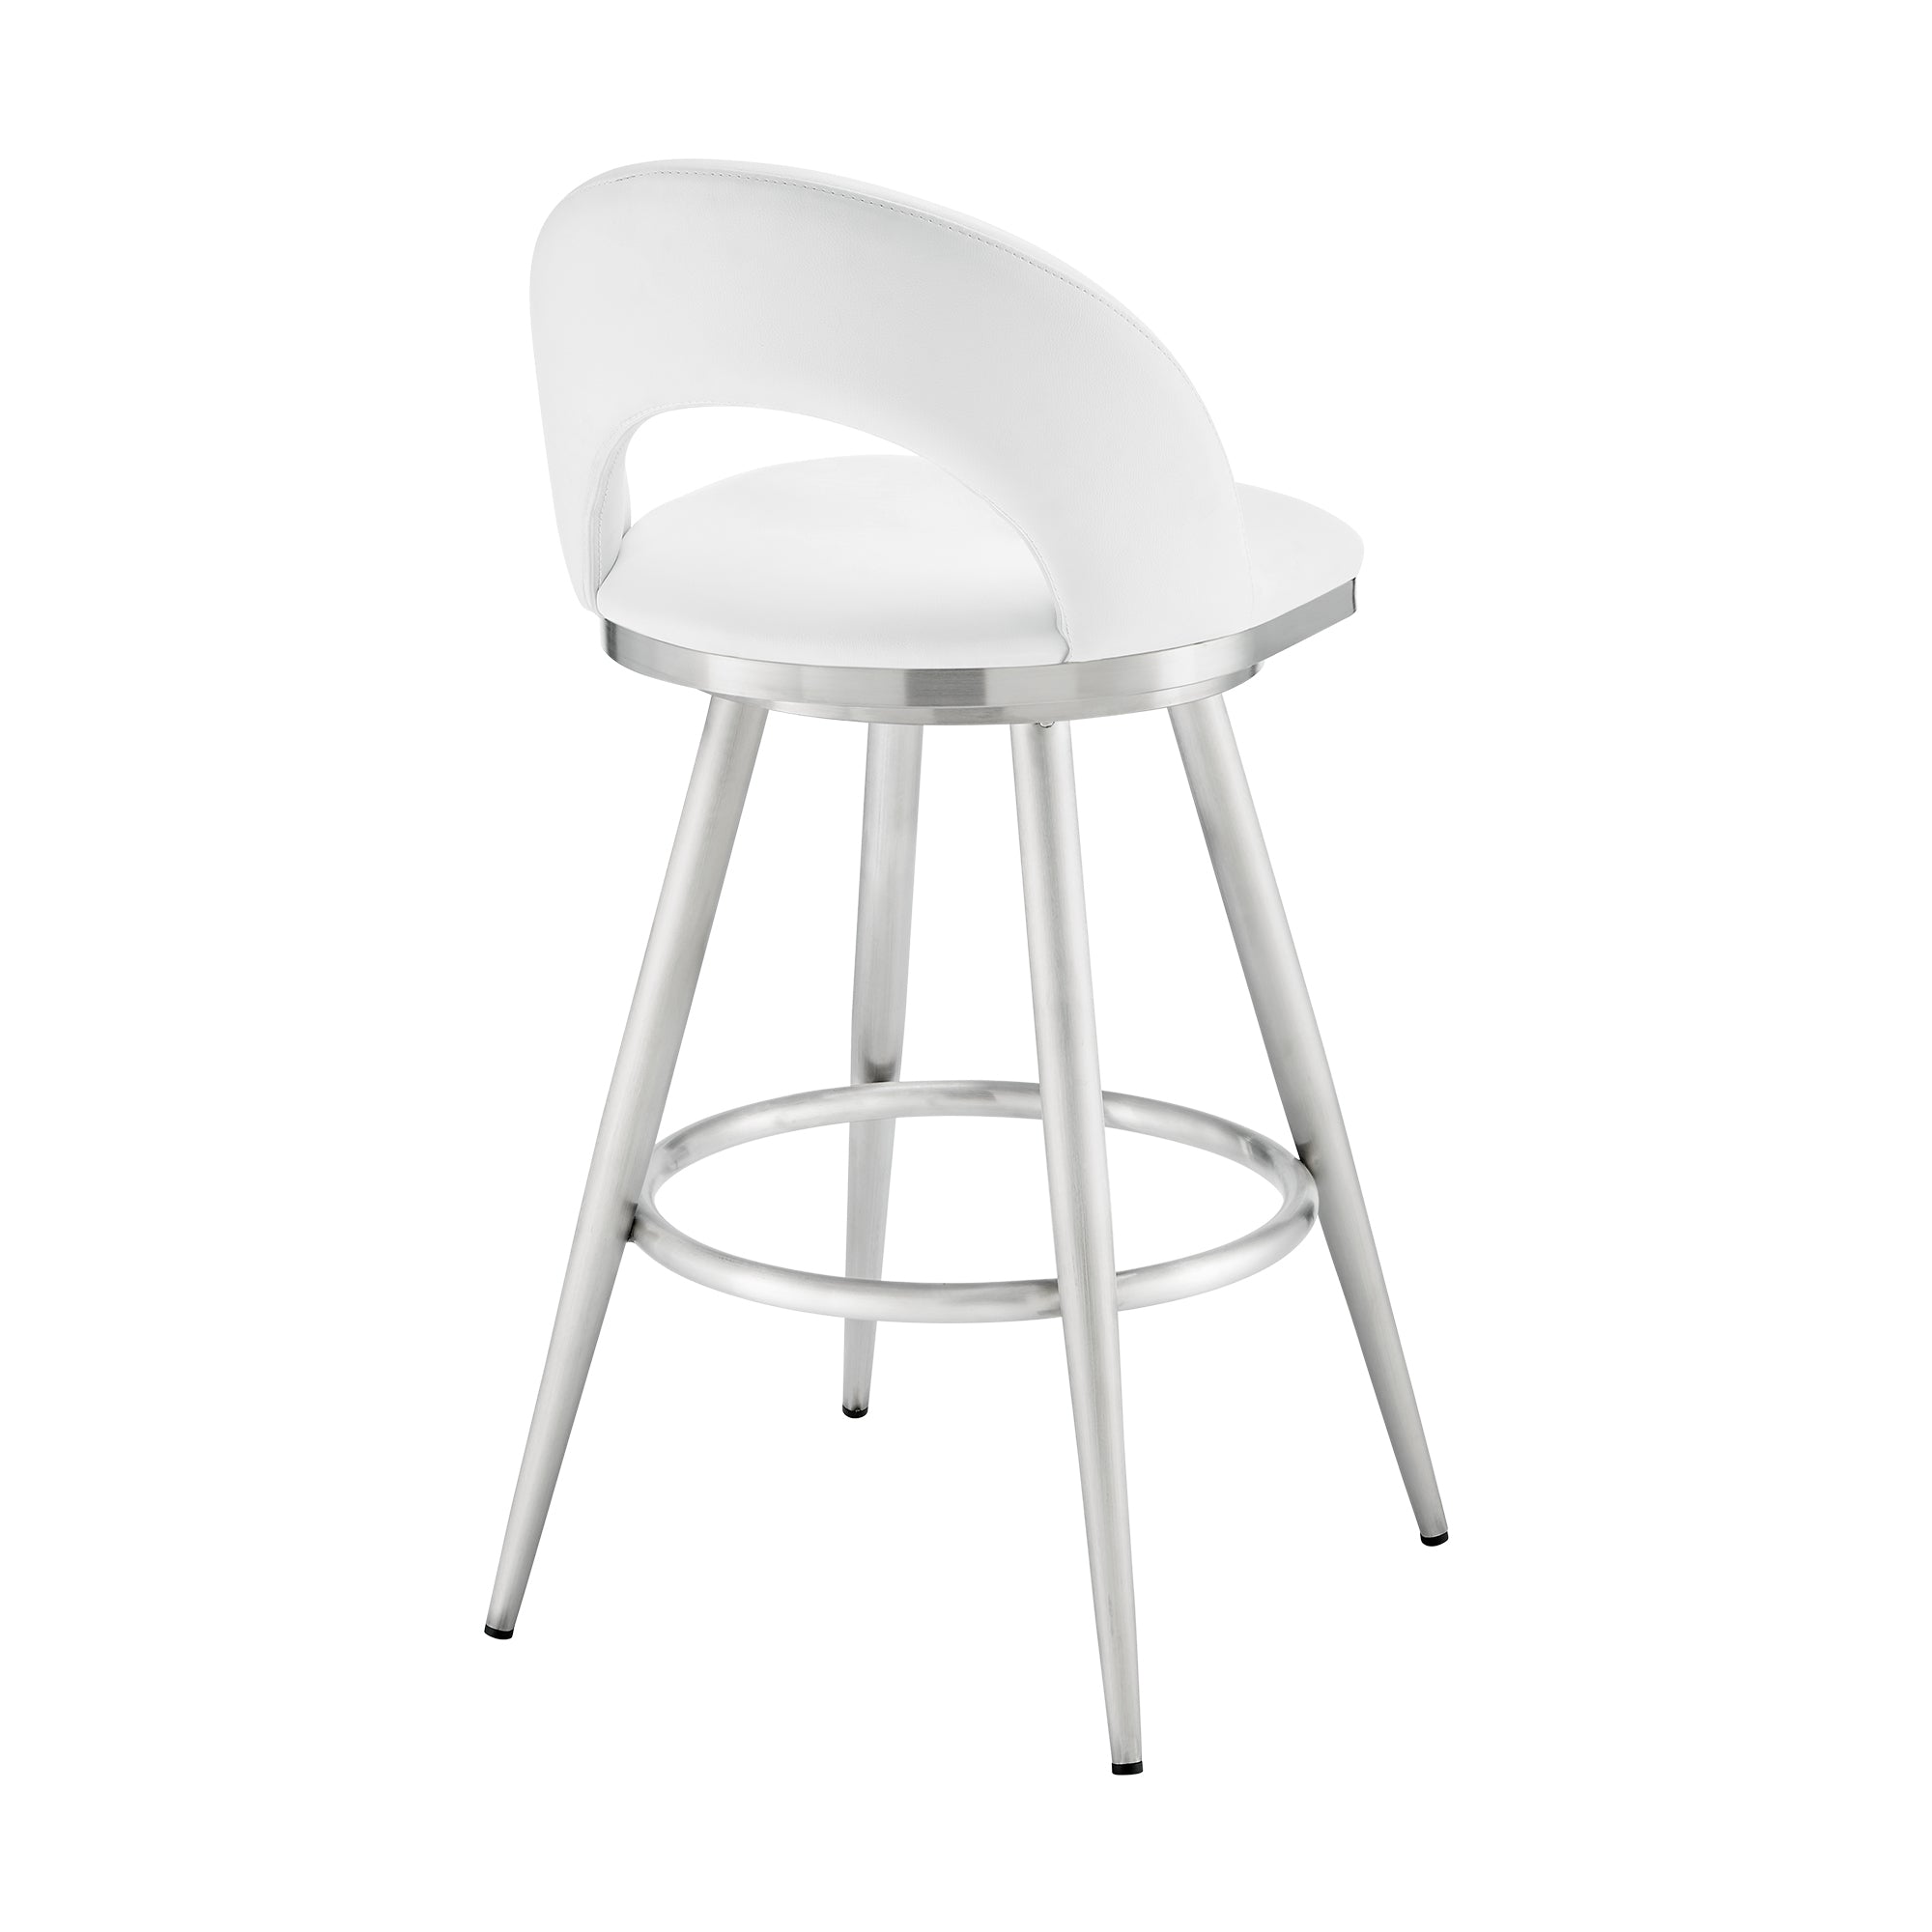 Armen Living - Lottech Swivel Counter or Bar Stool in Faux Leather and Metal - 840254335424